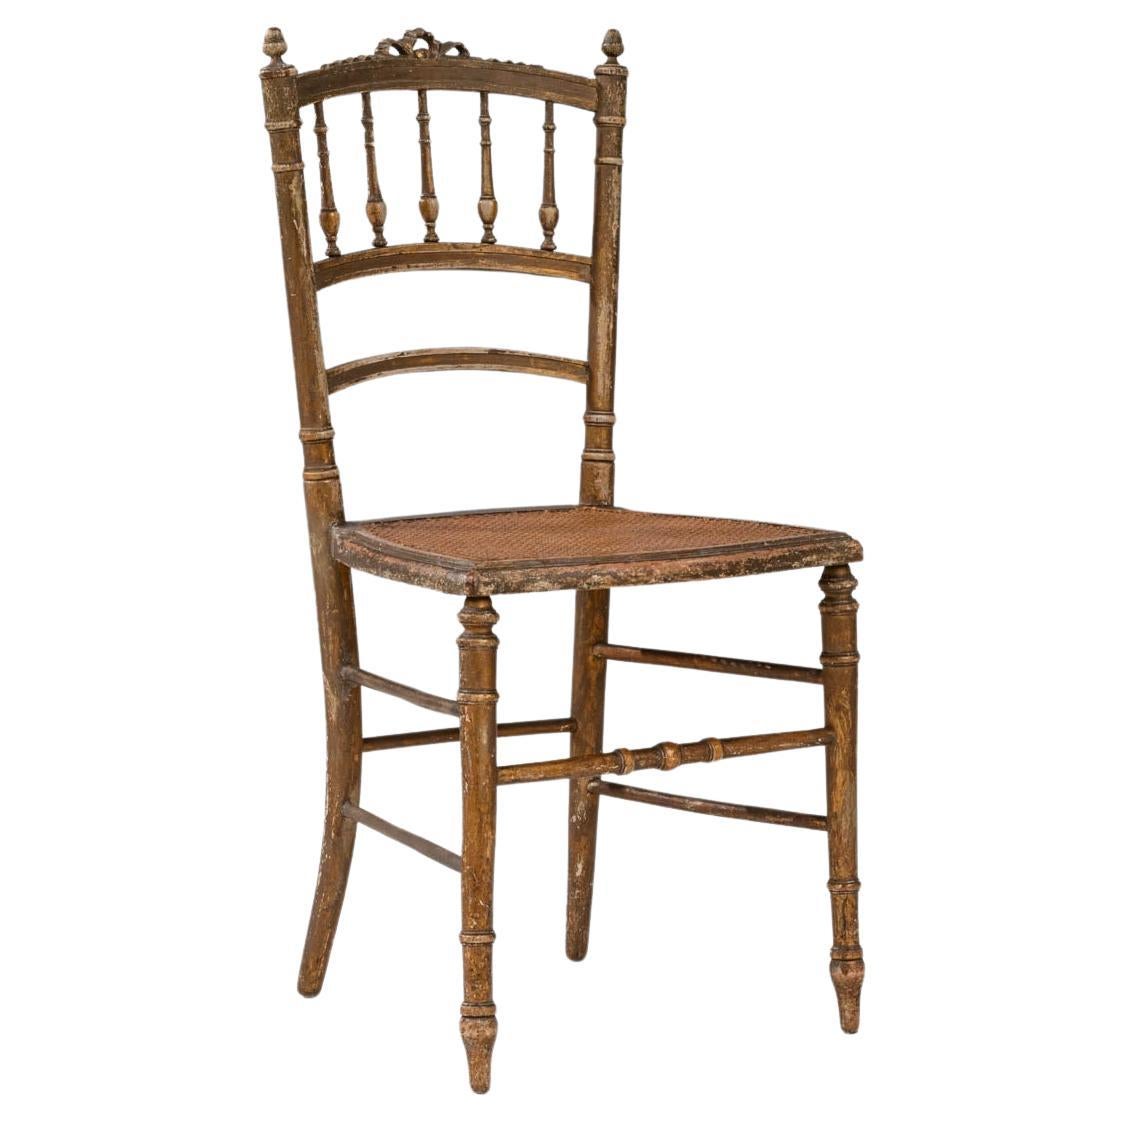 1880s French Wooden Chair